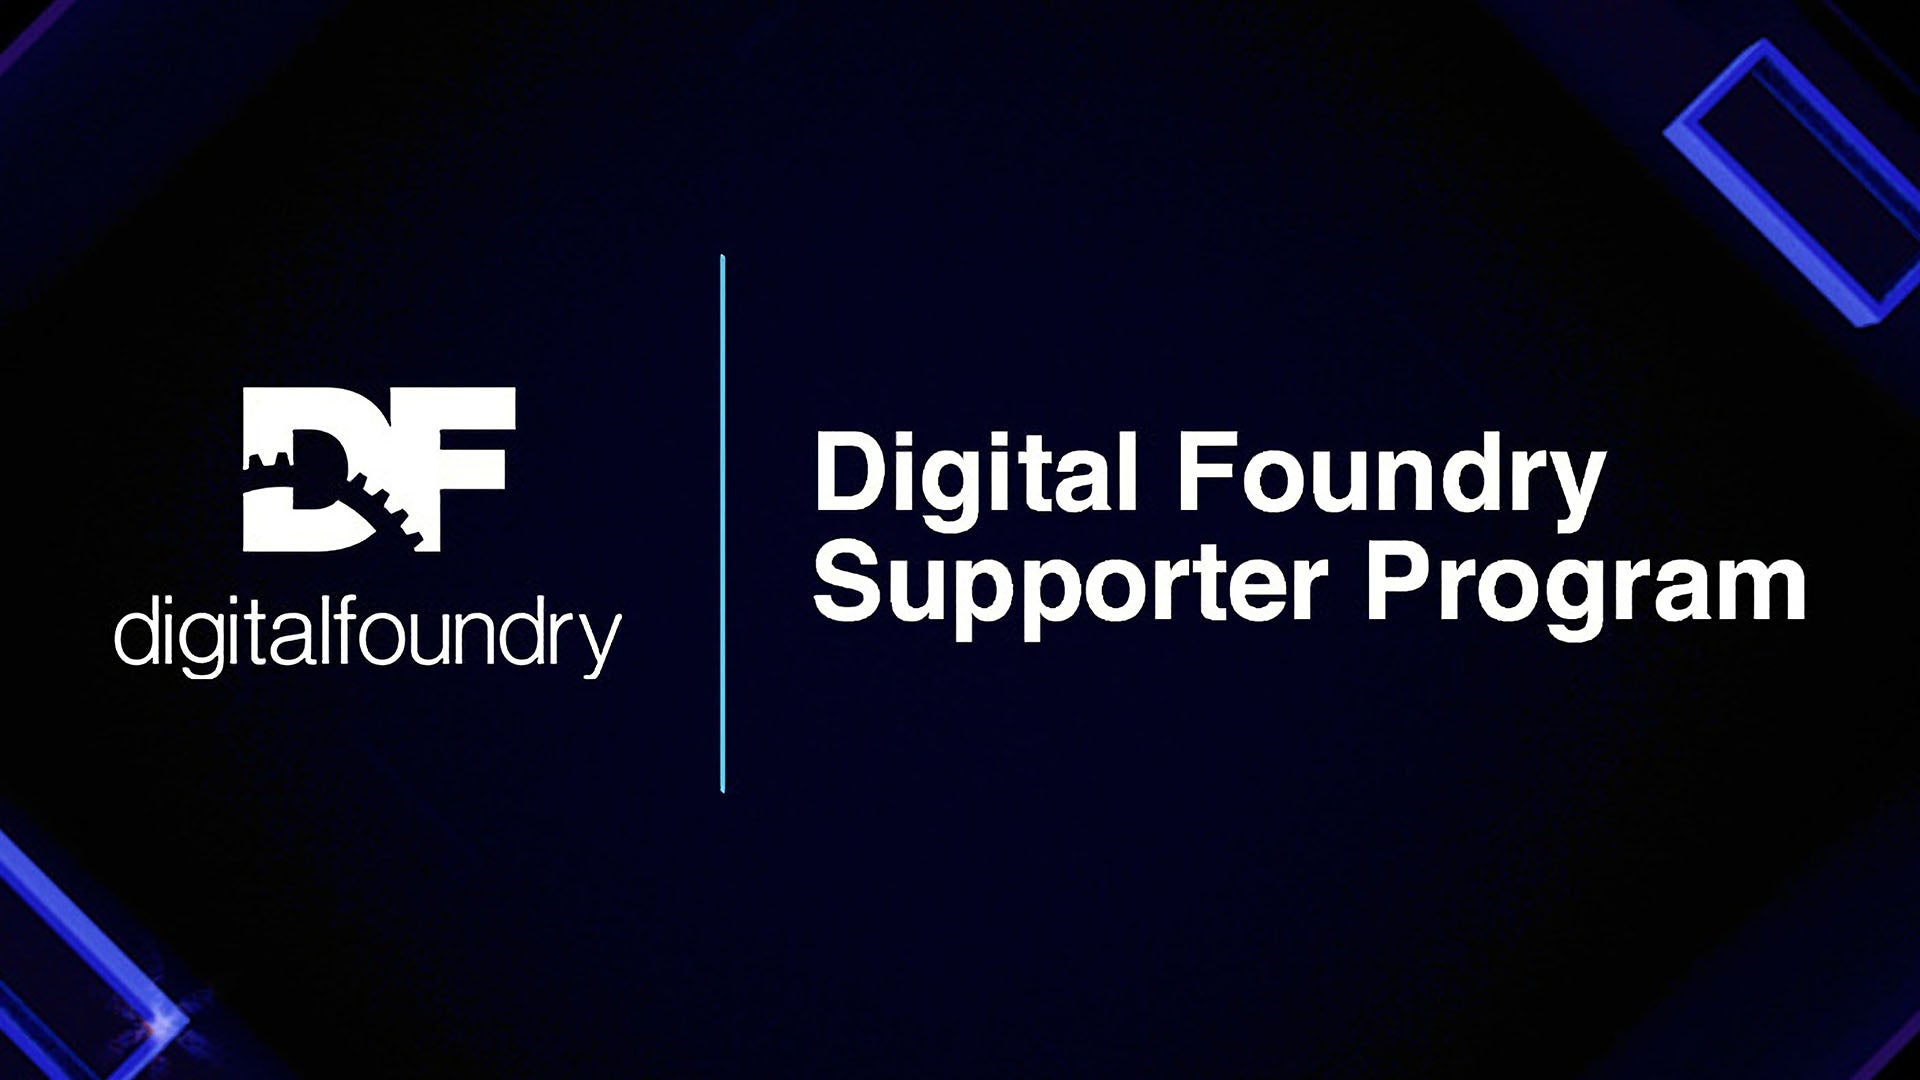 Image for The Digital Foundry Supporter Program - what we've achieved and where we're going next